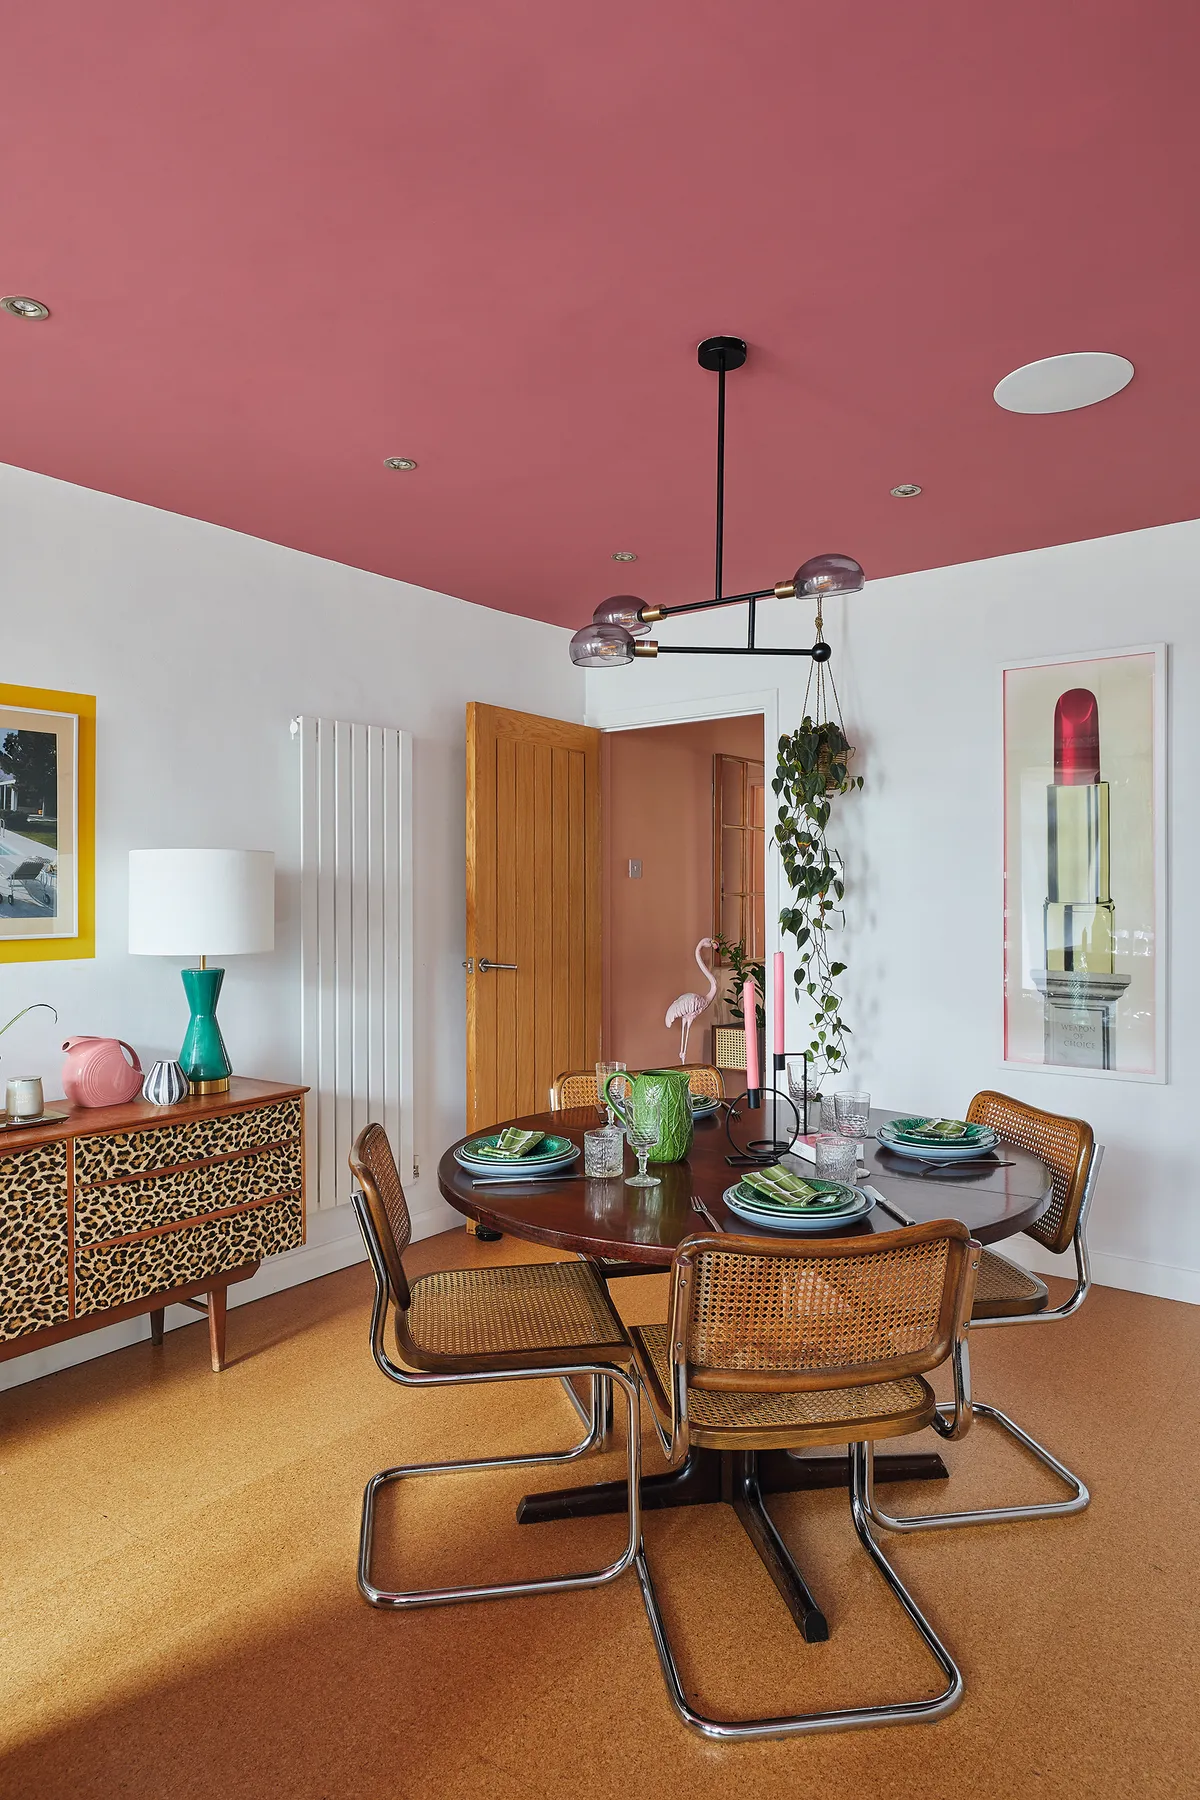 Bo's dining area with a pink painted ceiling